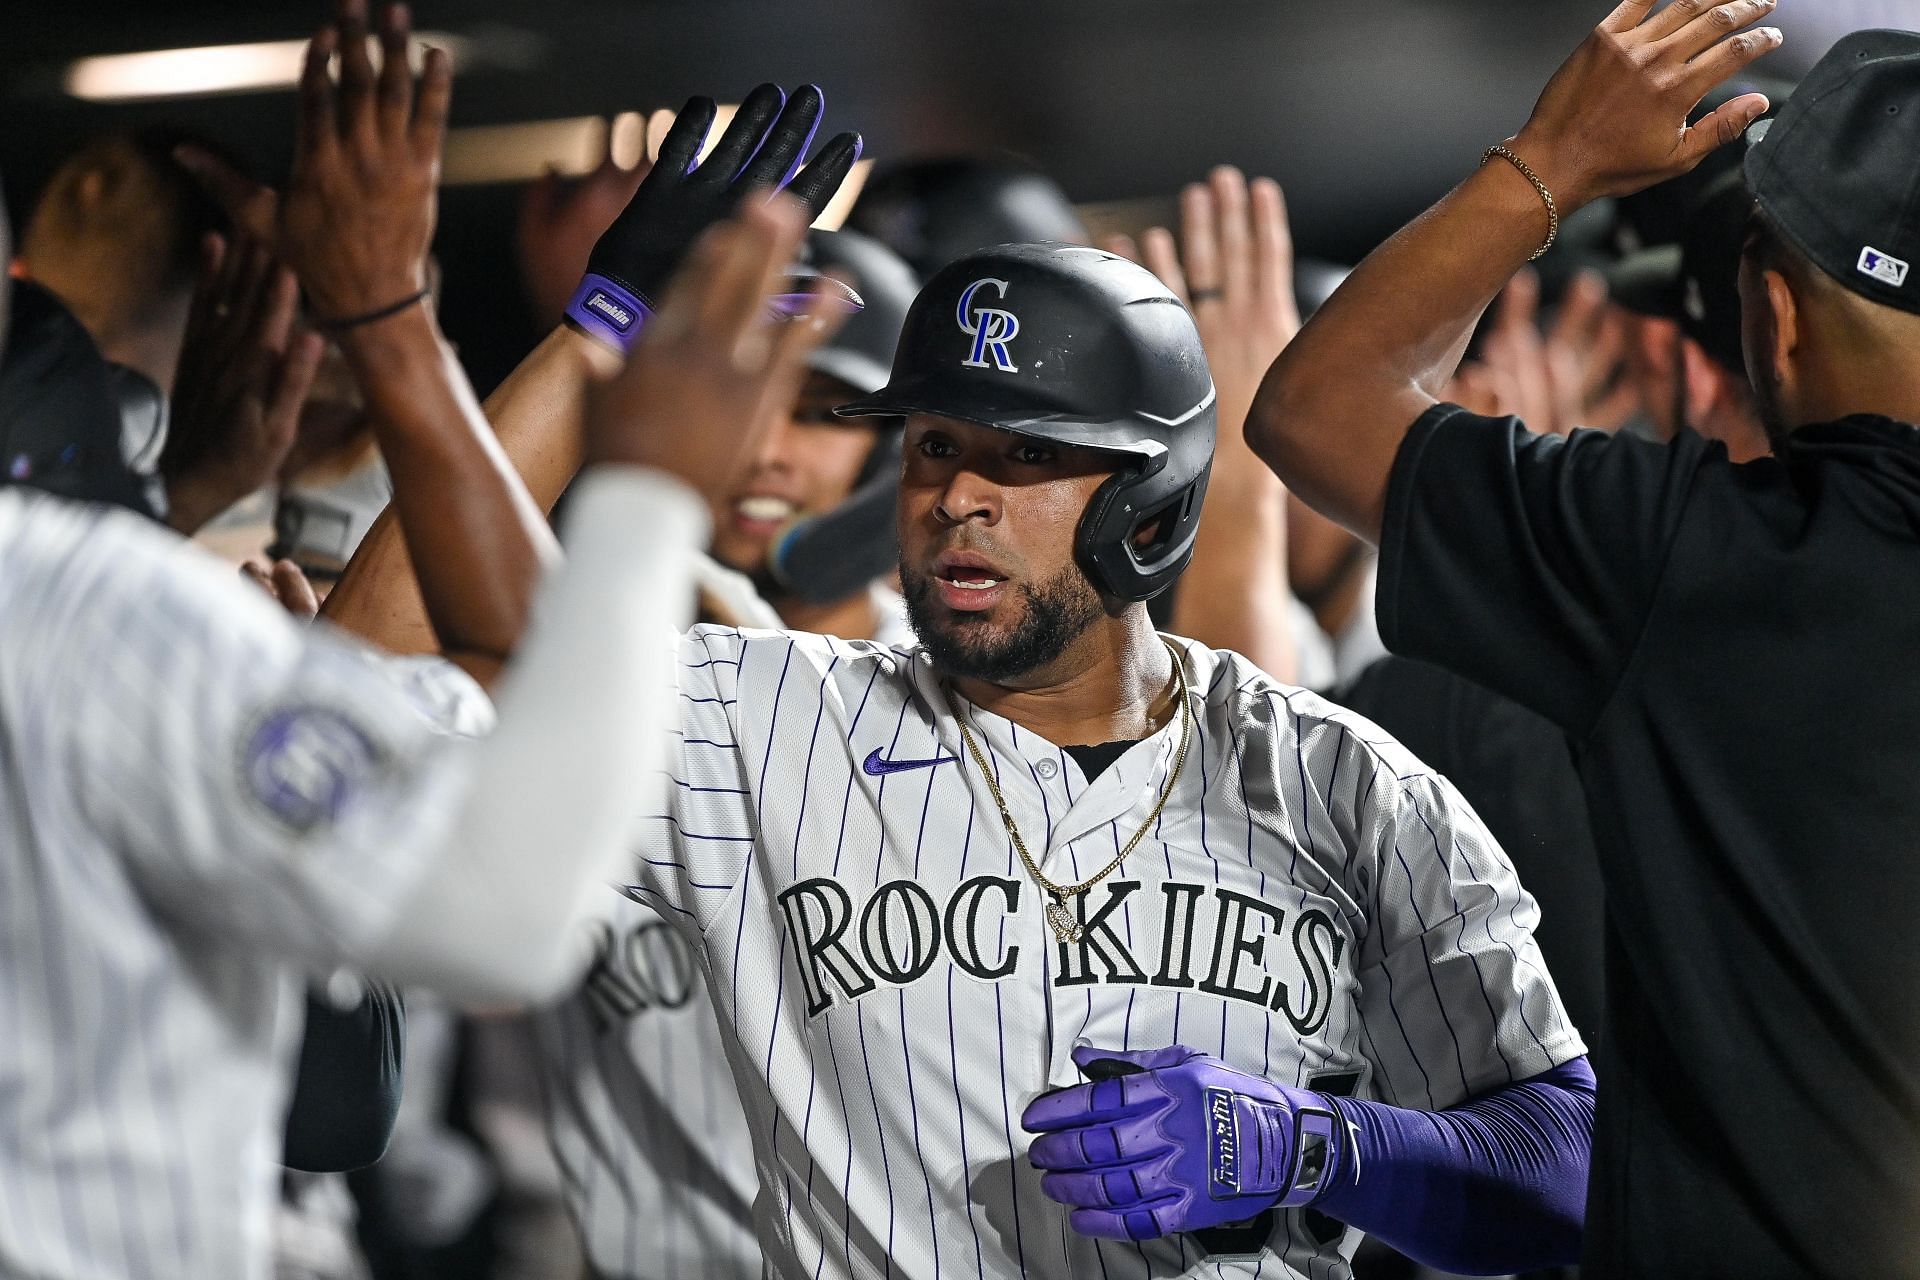 Elias Diaz of the Colorado Rockies is congratulated in the dugout at Coors Field